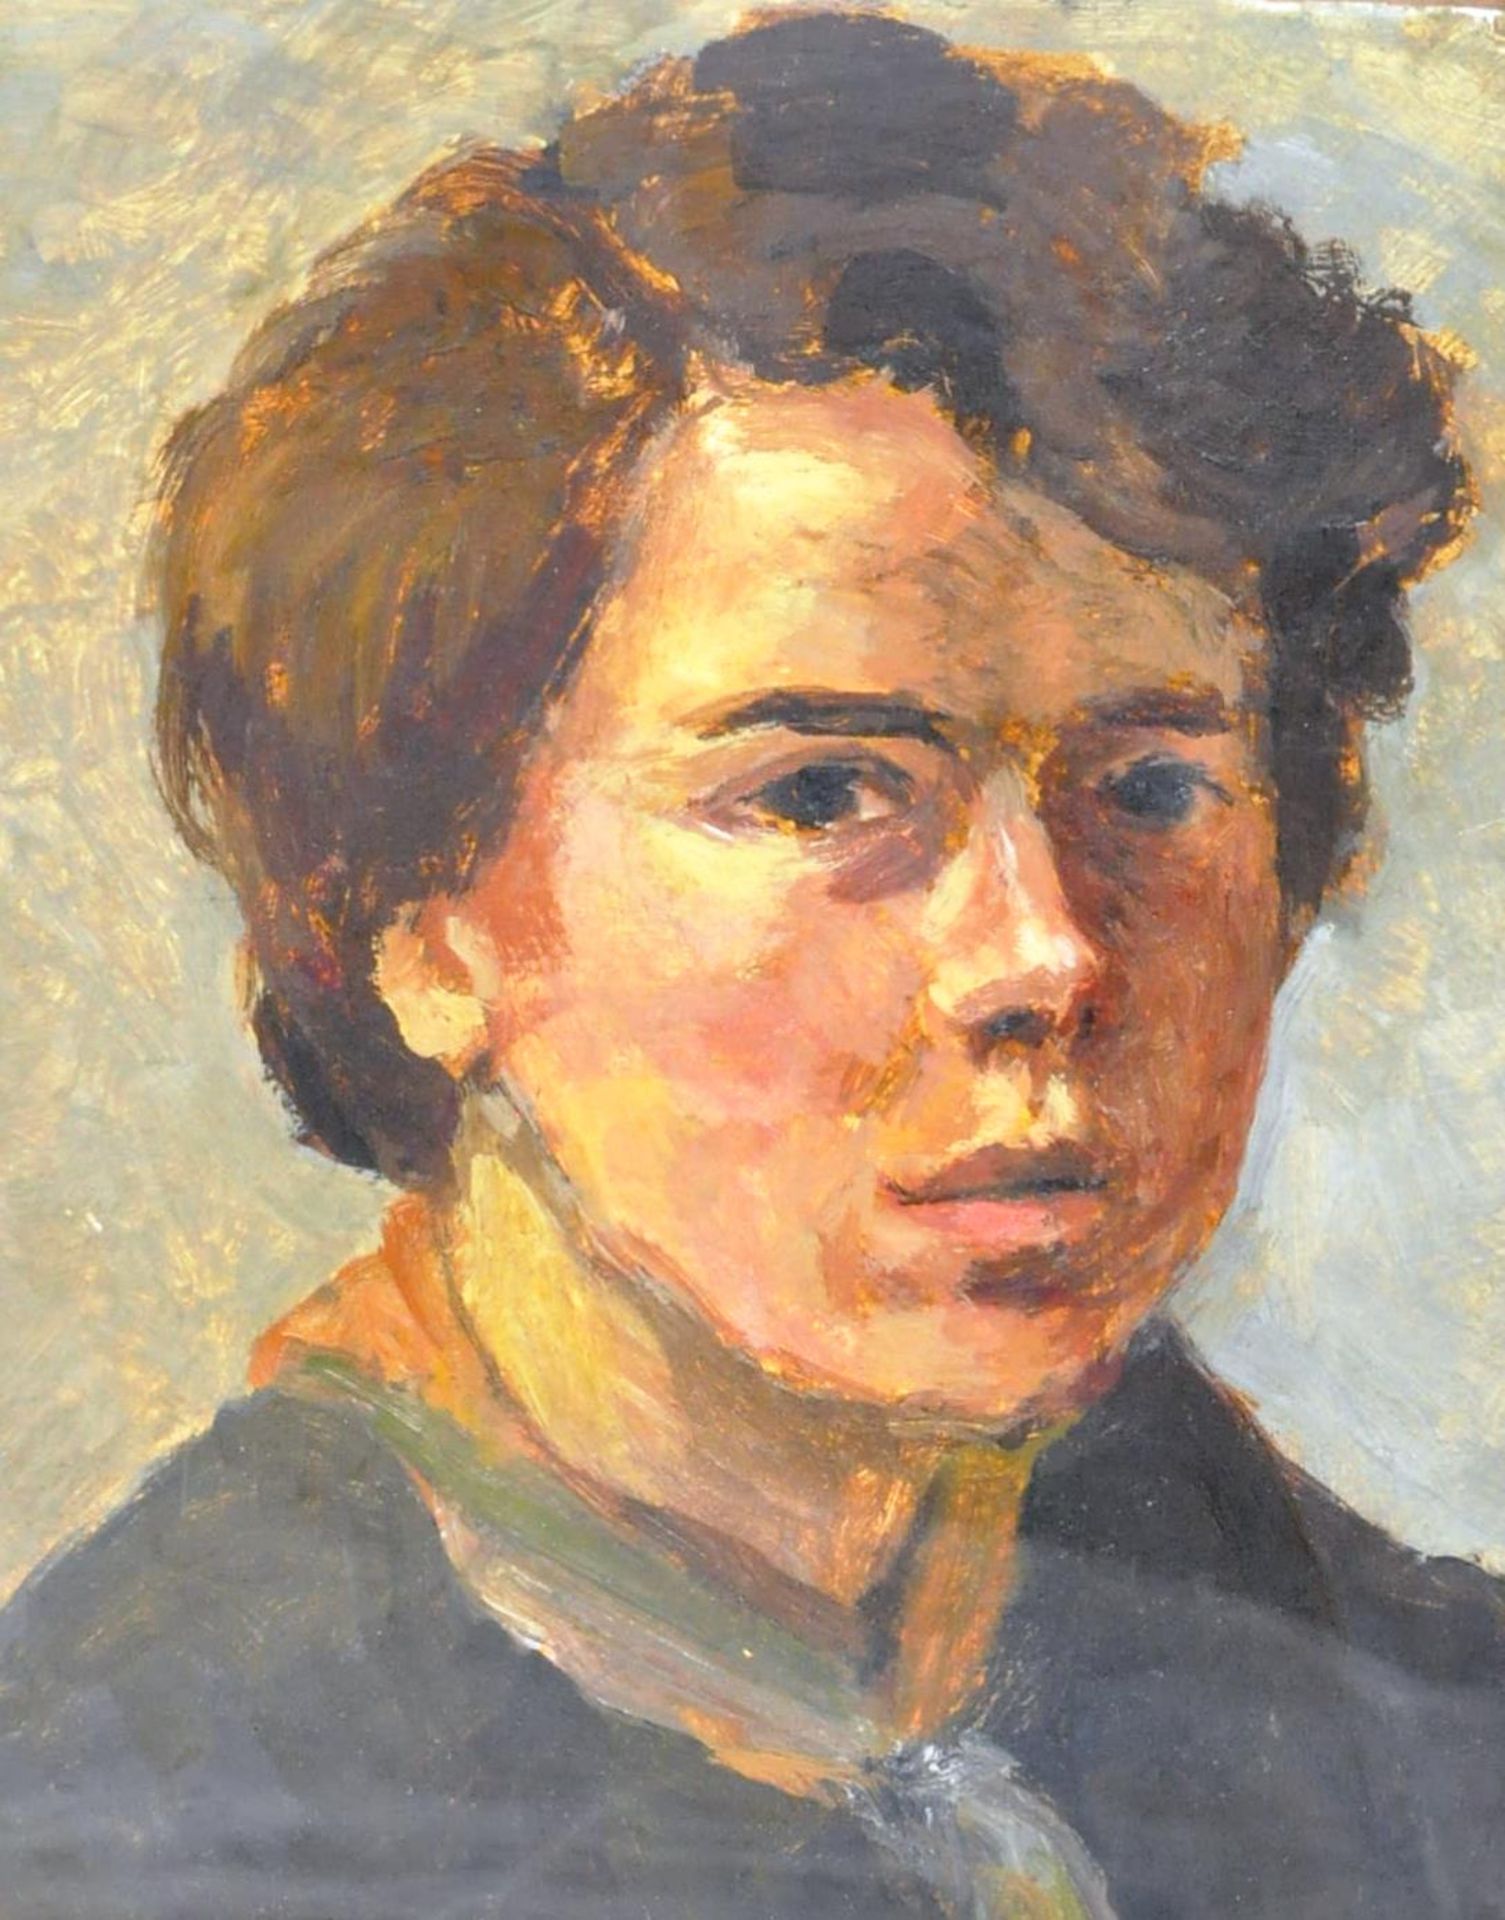 MID 20TH CENTURY OIL ON BOARD PORTRAIT PAINTING OF A YOUNG BOY - Image 2 of 6